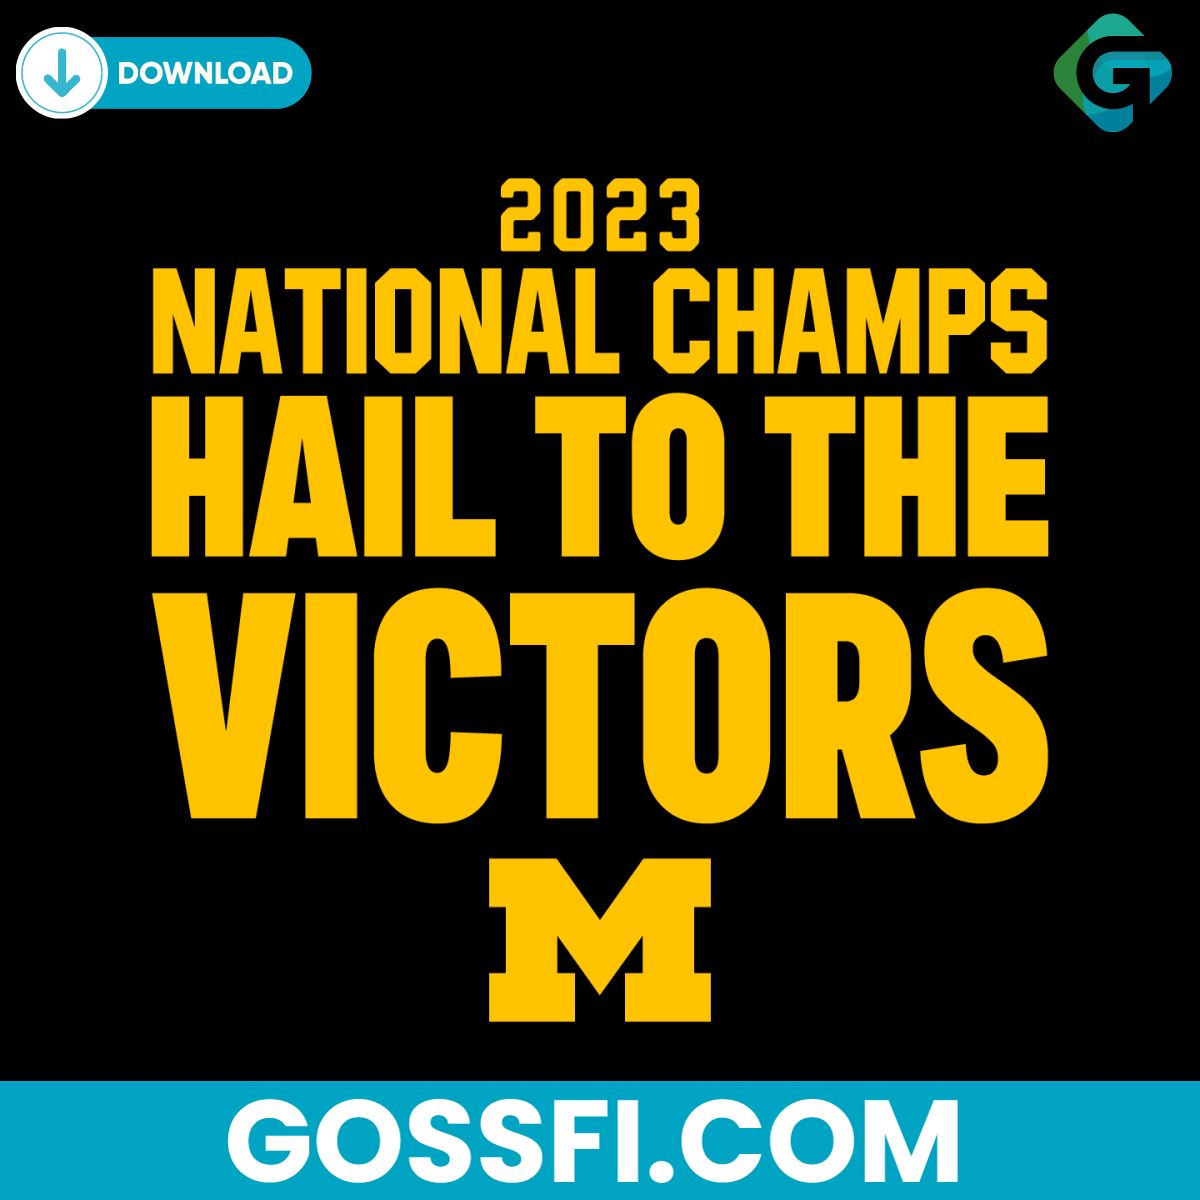 2023-national-champs-hail-to-the-victors-svg